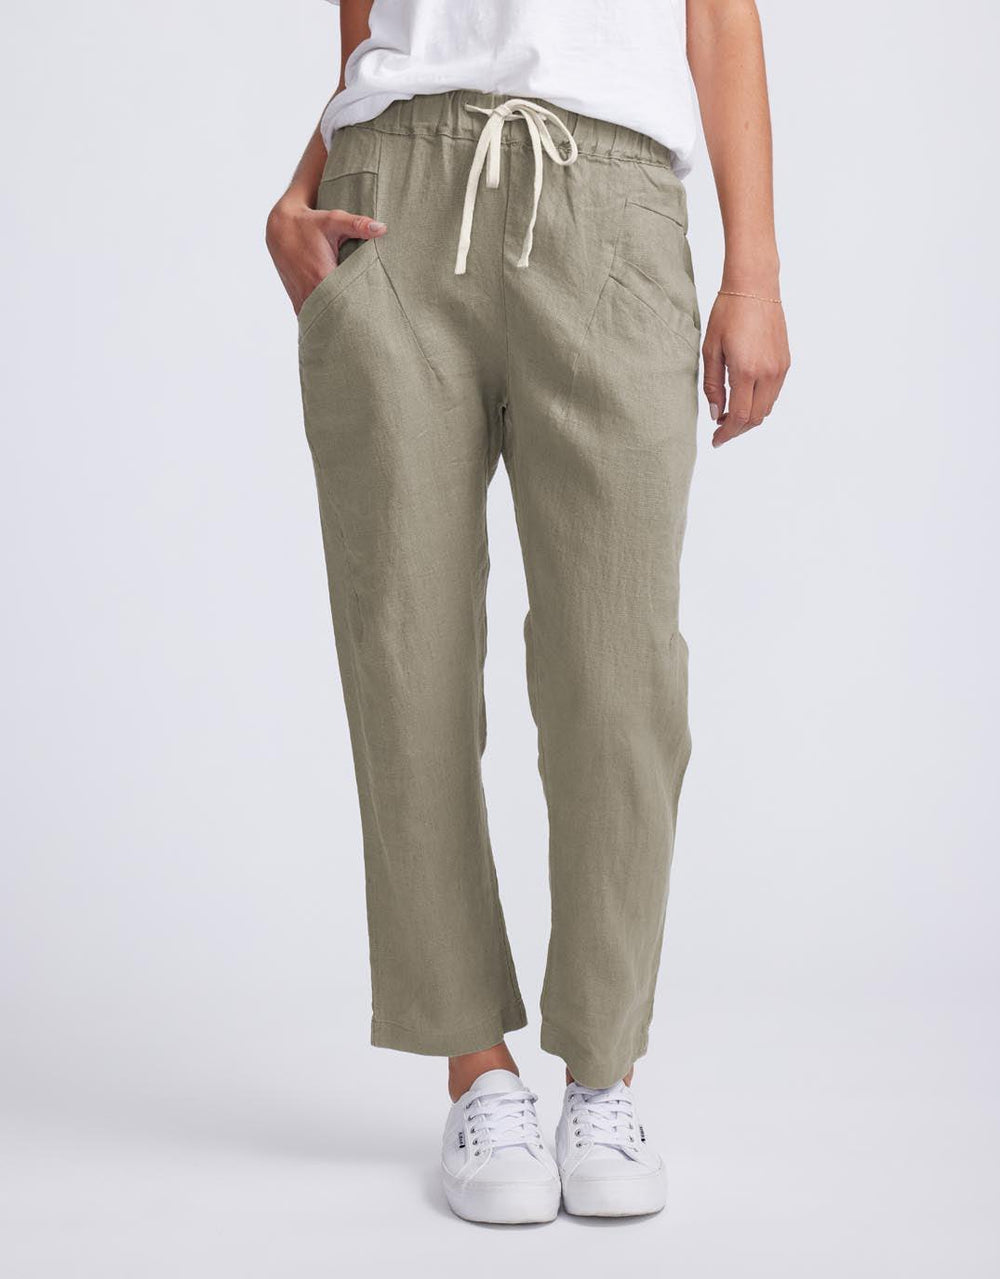 Women's Pants | Shop Trending Pants and Trousers Online | Fortunate One